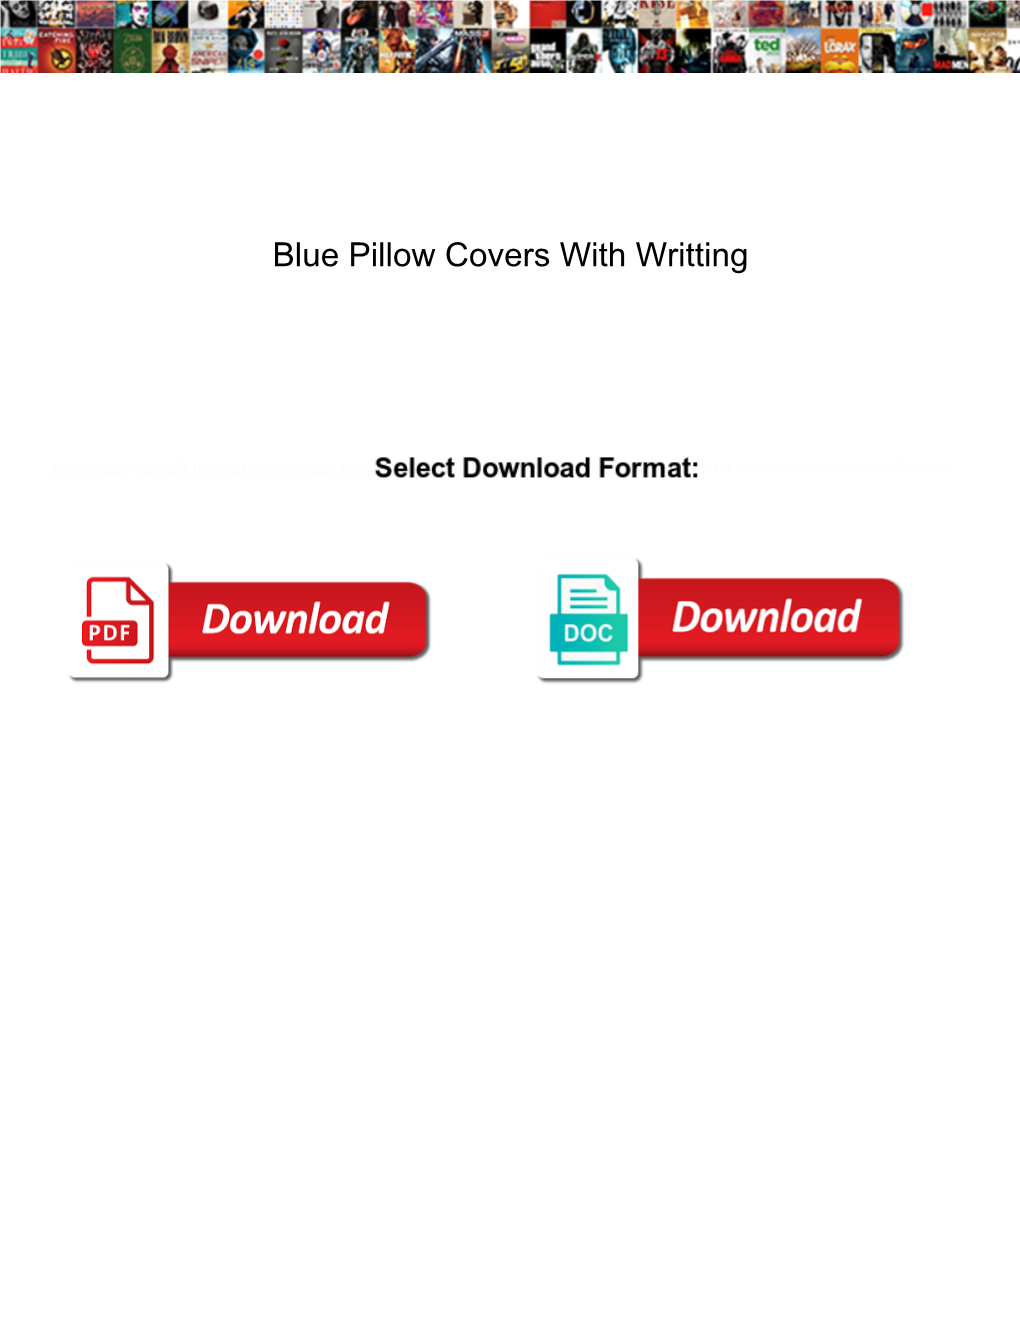 Blue Pillow Covers with Writting